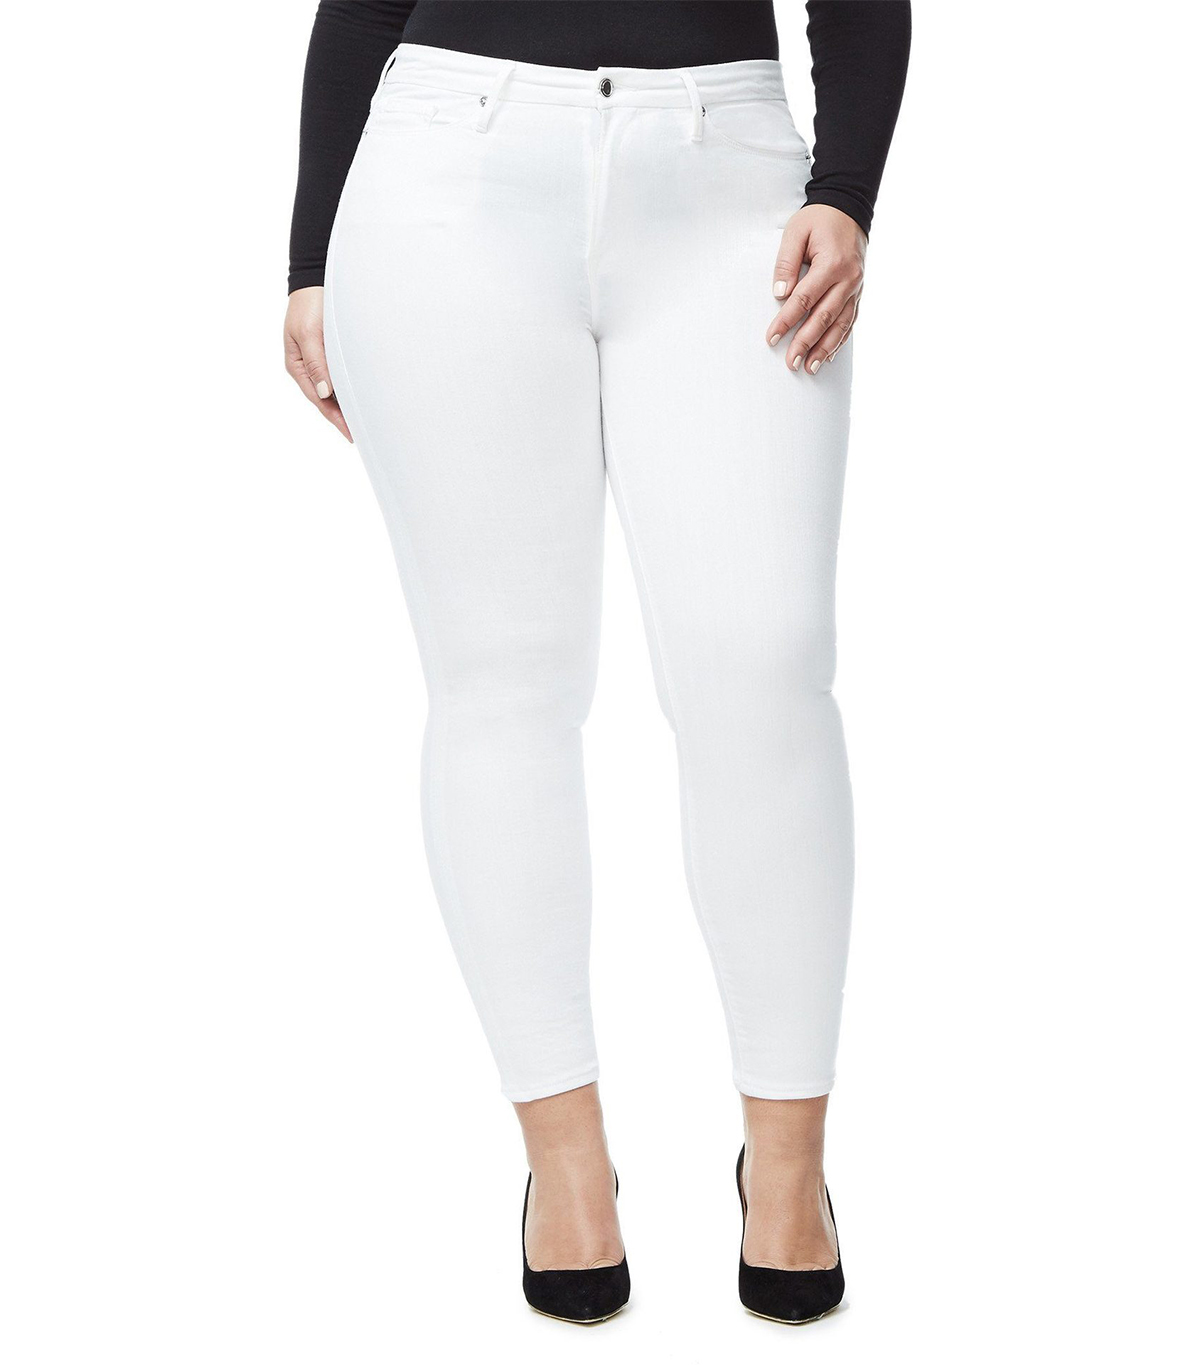 comfortable white jeans